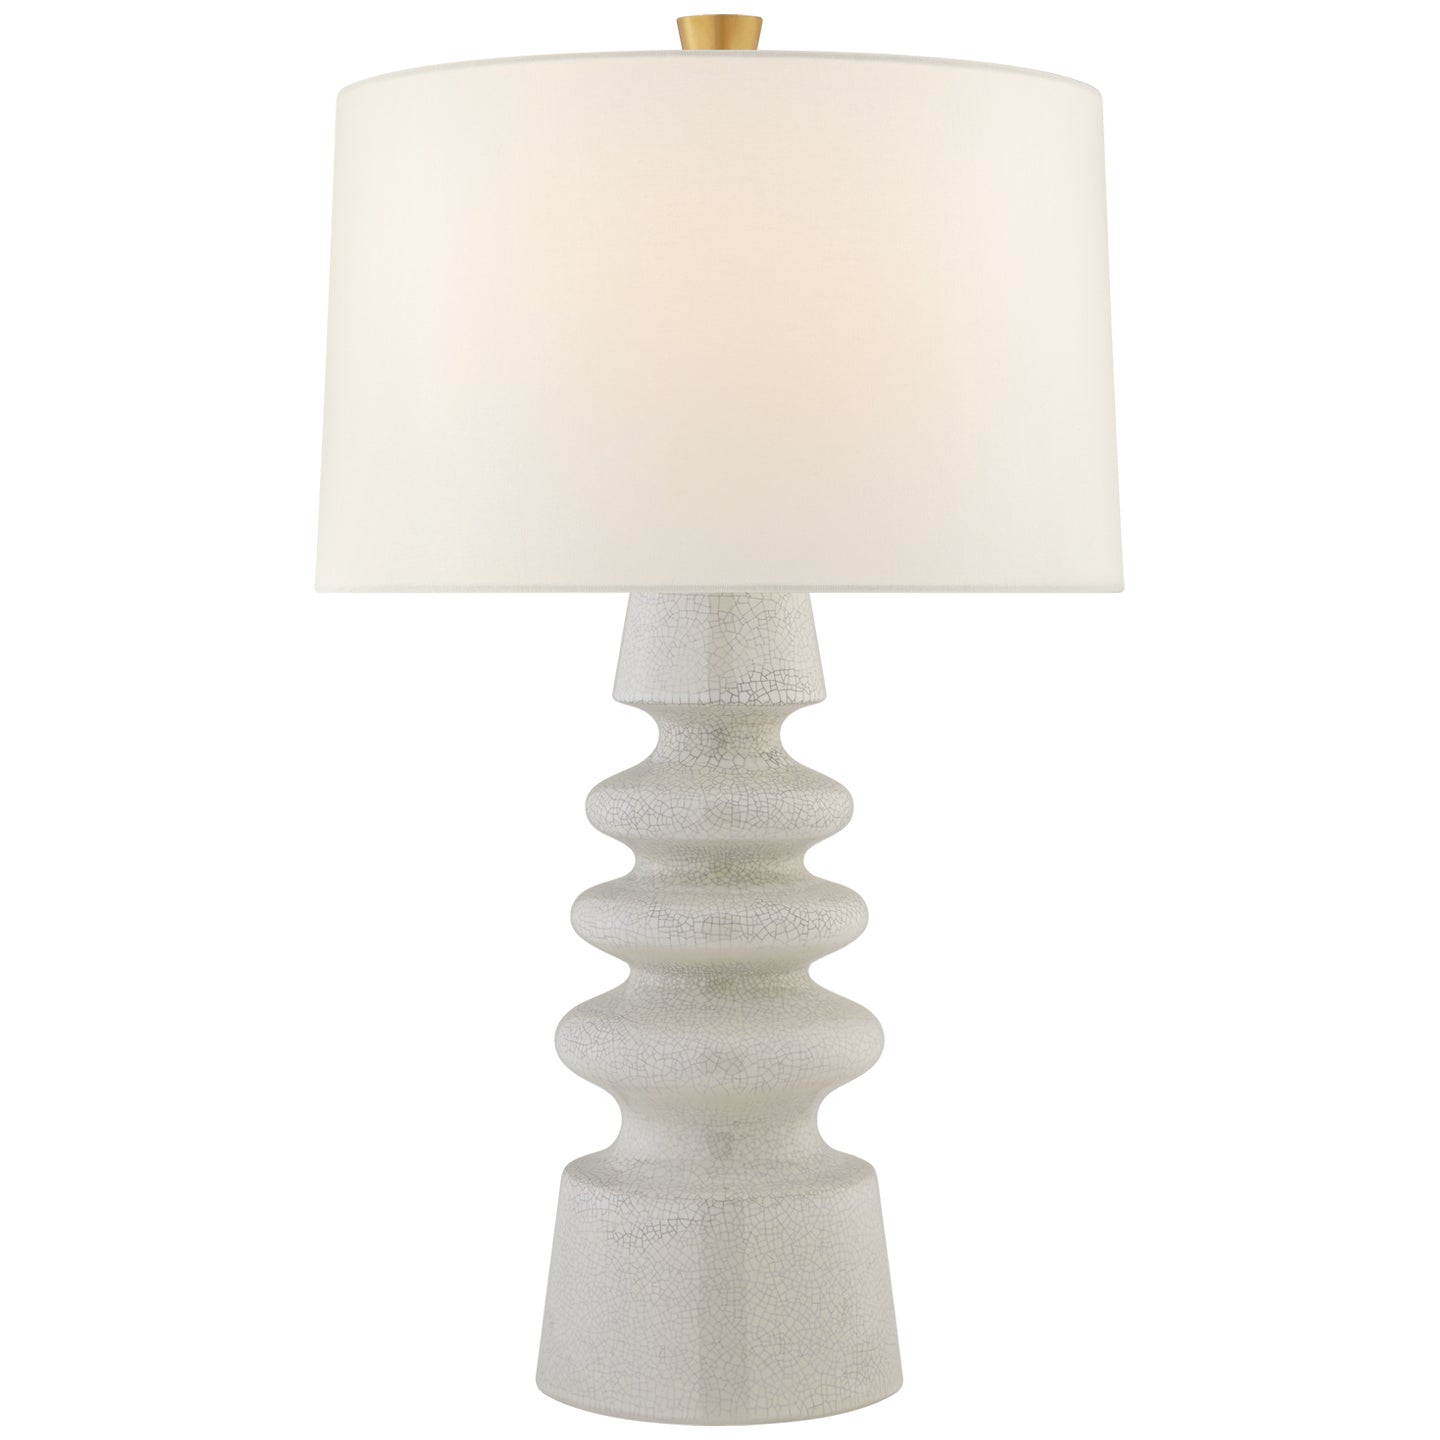 Visual Comfort Signature - JN 3608WTC-L - One Light Table Lamp - Andreas - White Crackle